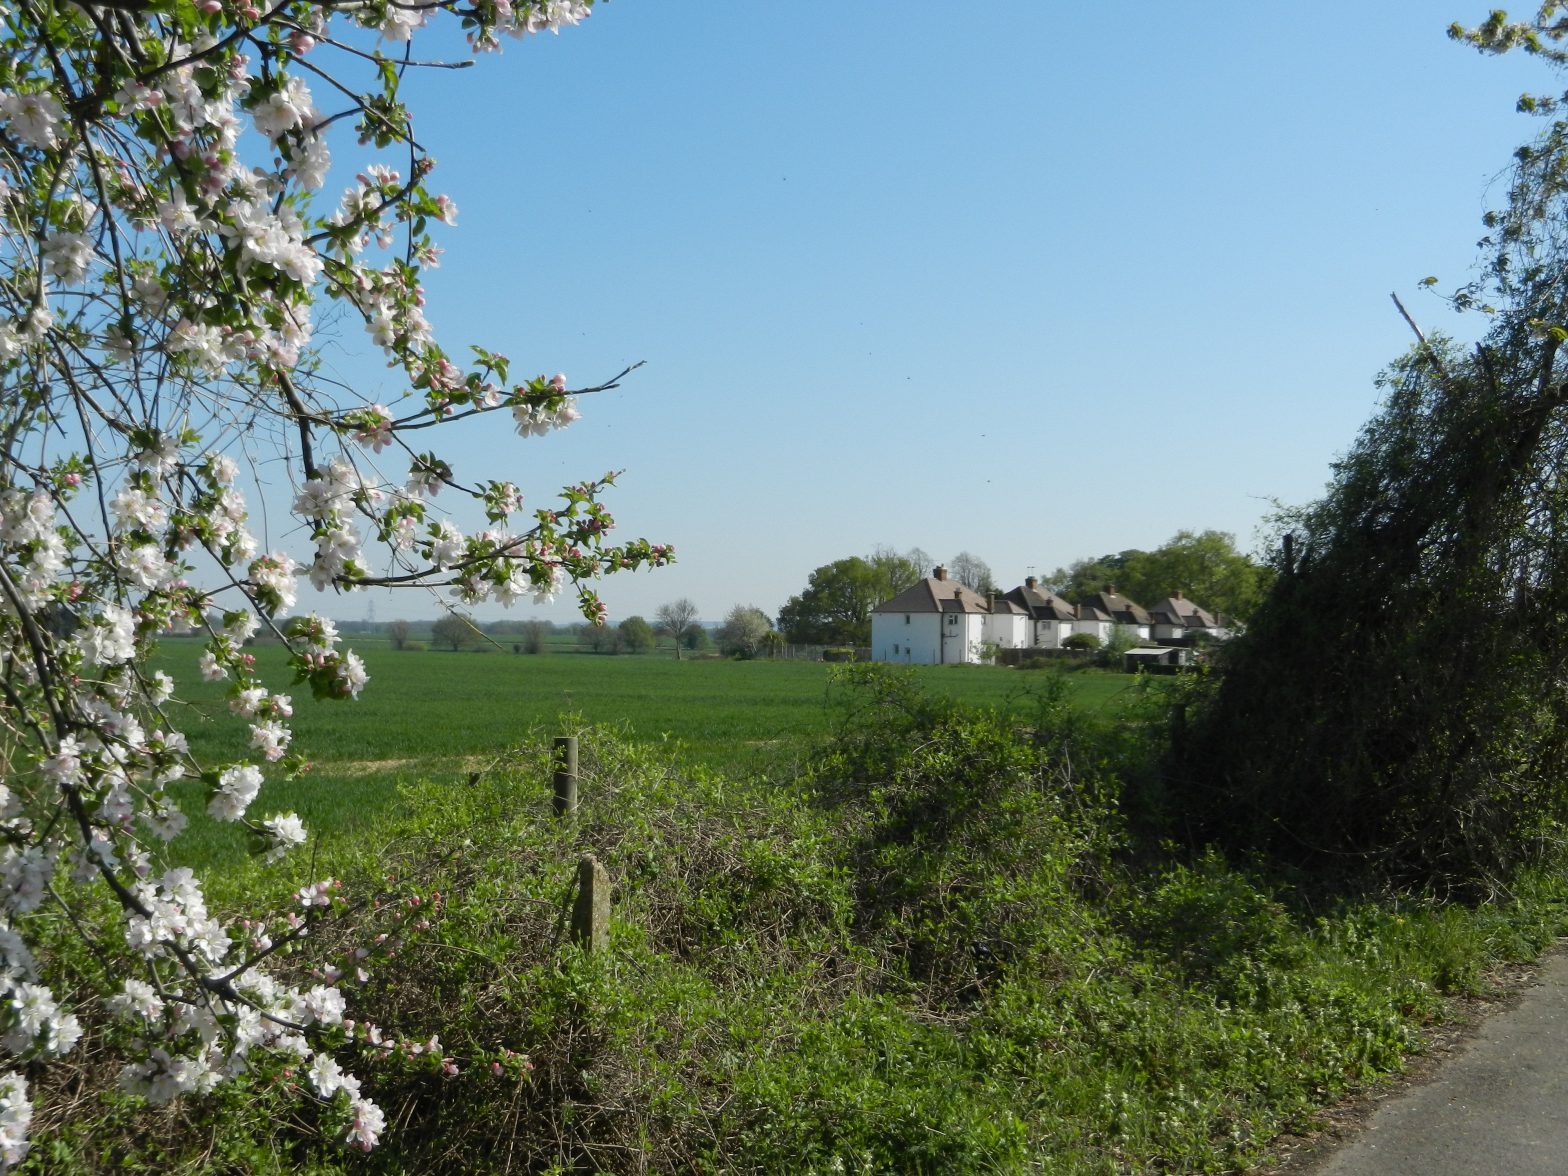 Hunsdon from Widford